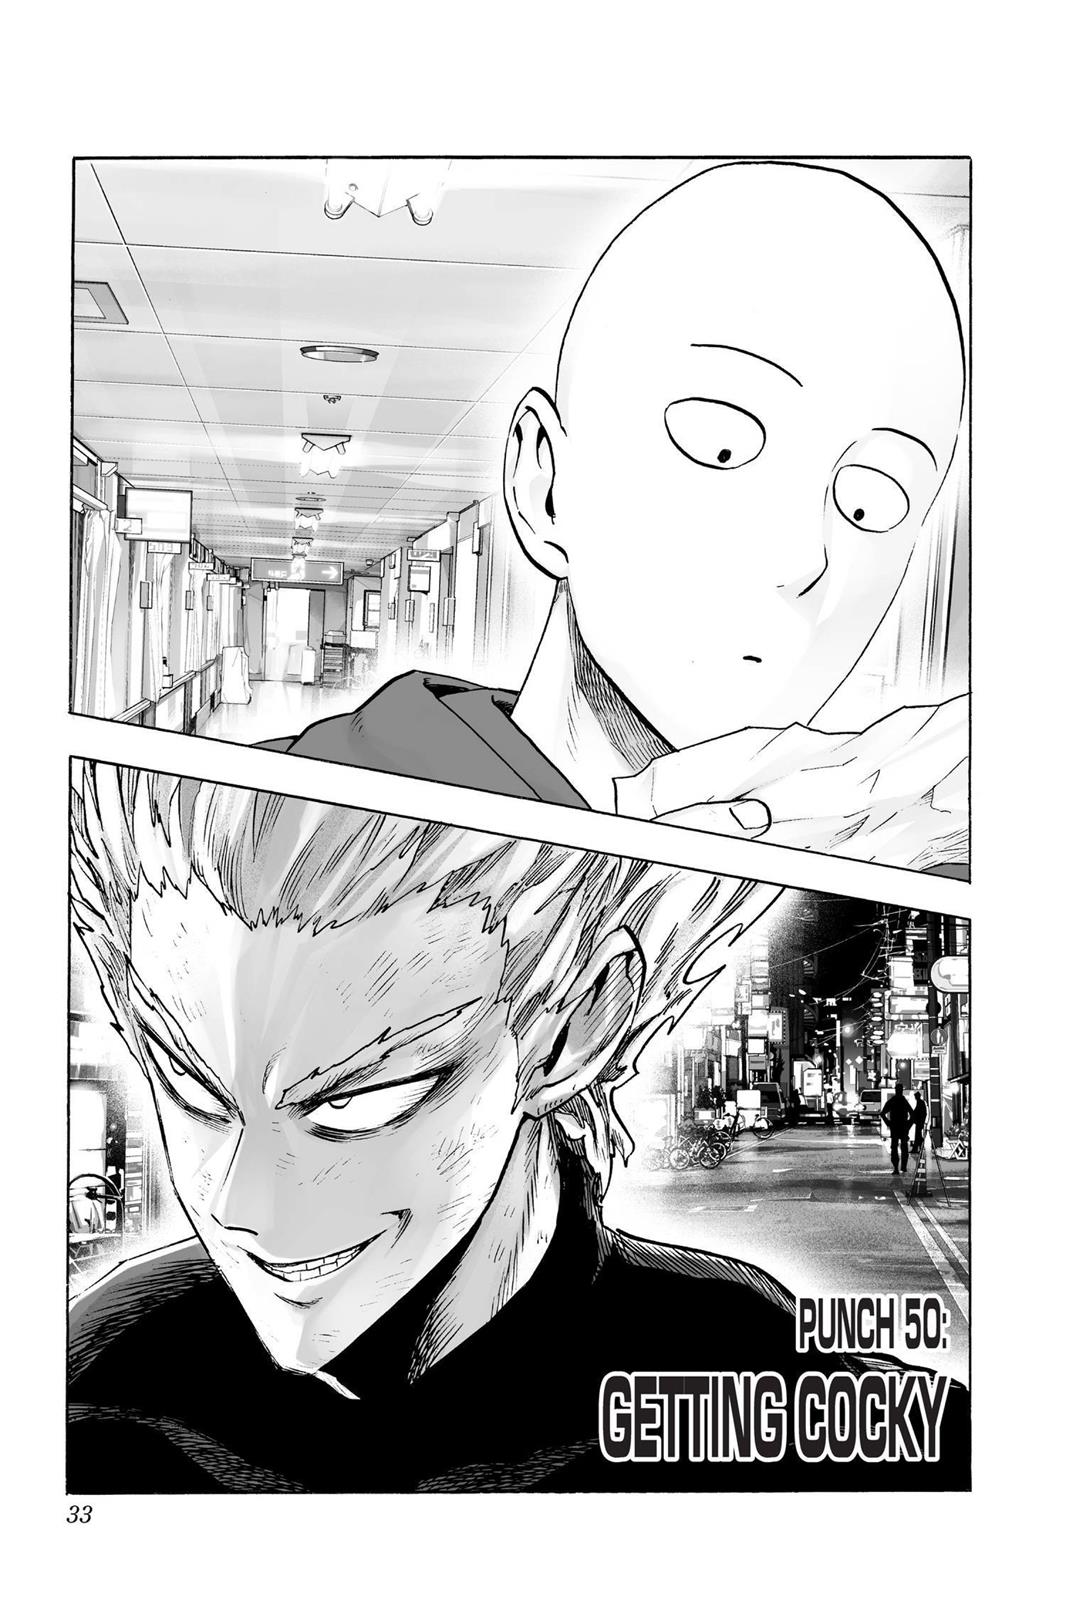 One-Punch Man, Punch 50 image 01